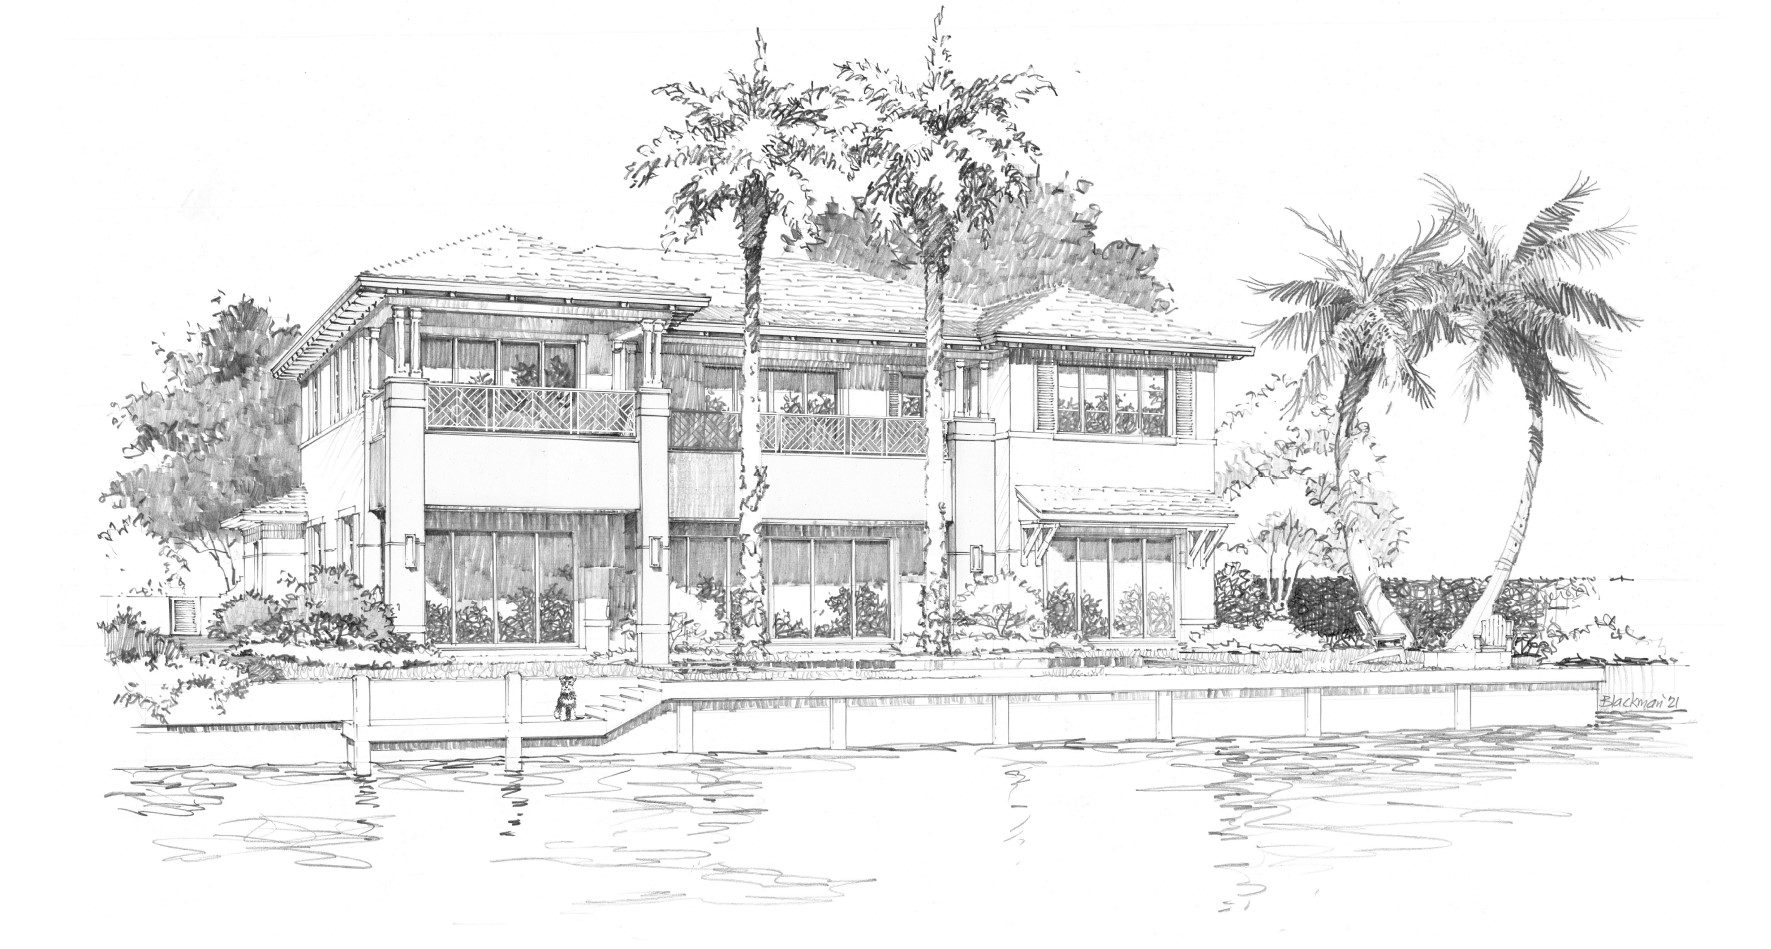 A drawing of a house with palm trees in front.